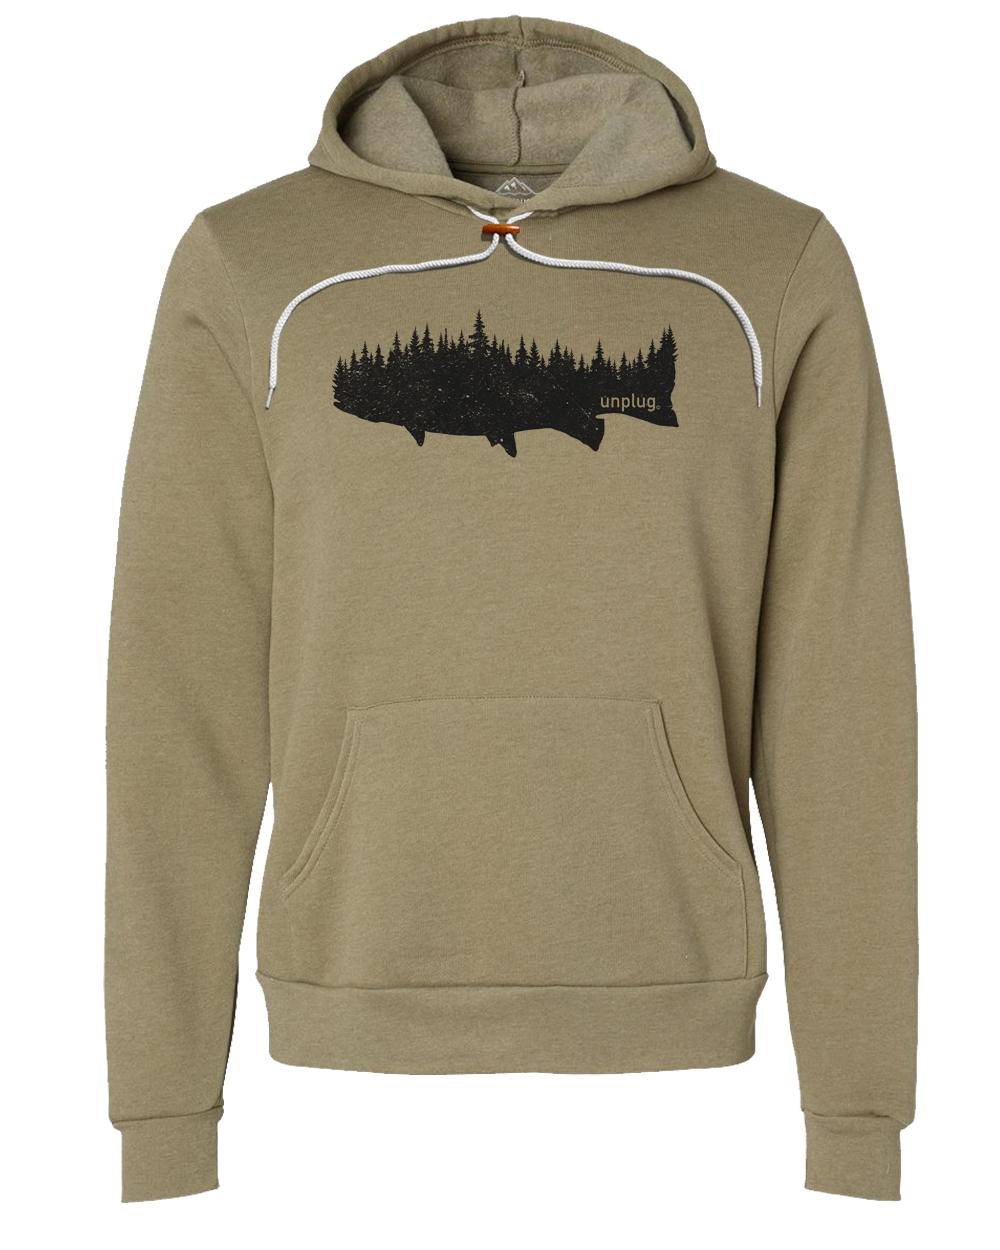 Trout In The Trees Premium Super Soft Hooded Sweatshirt - Life Unplugged